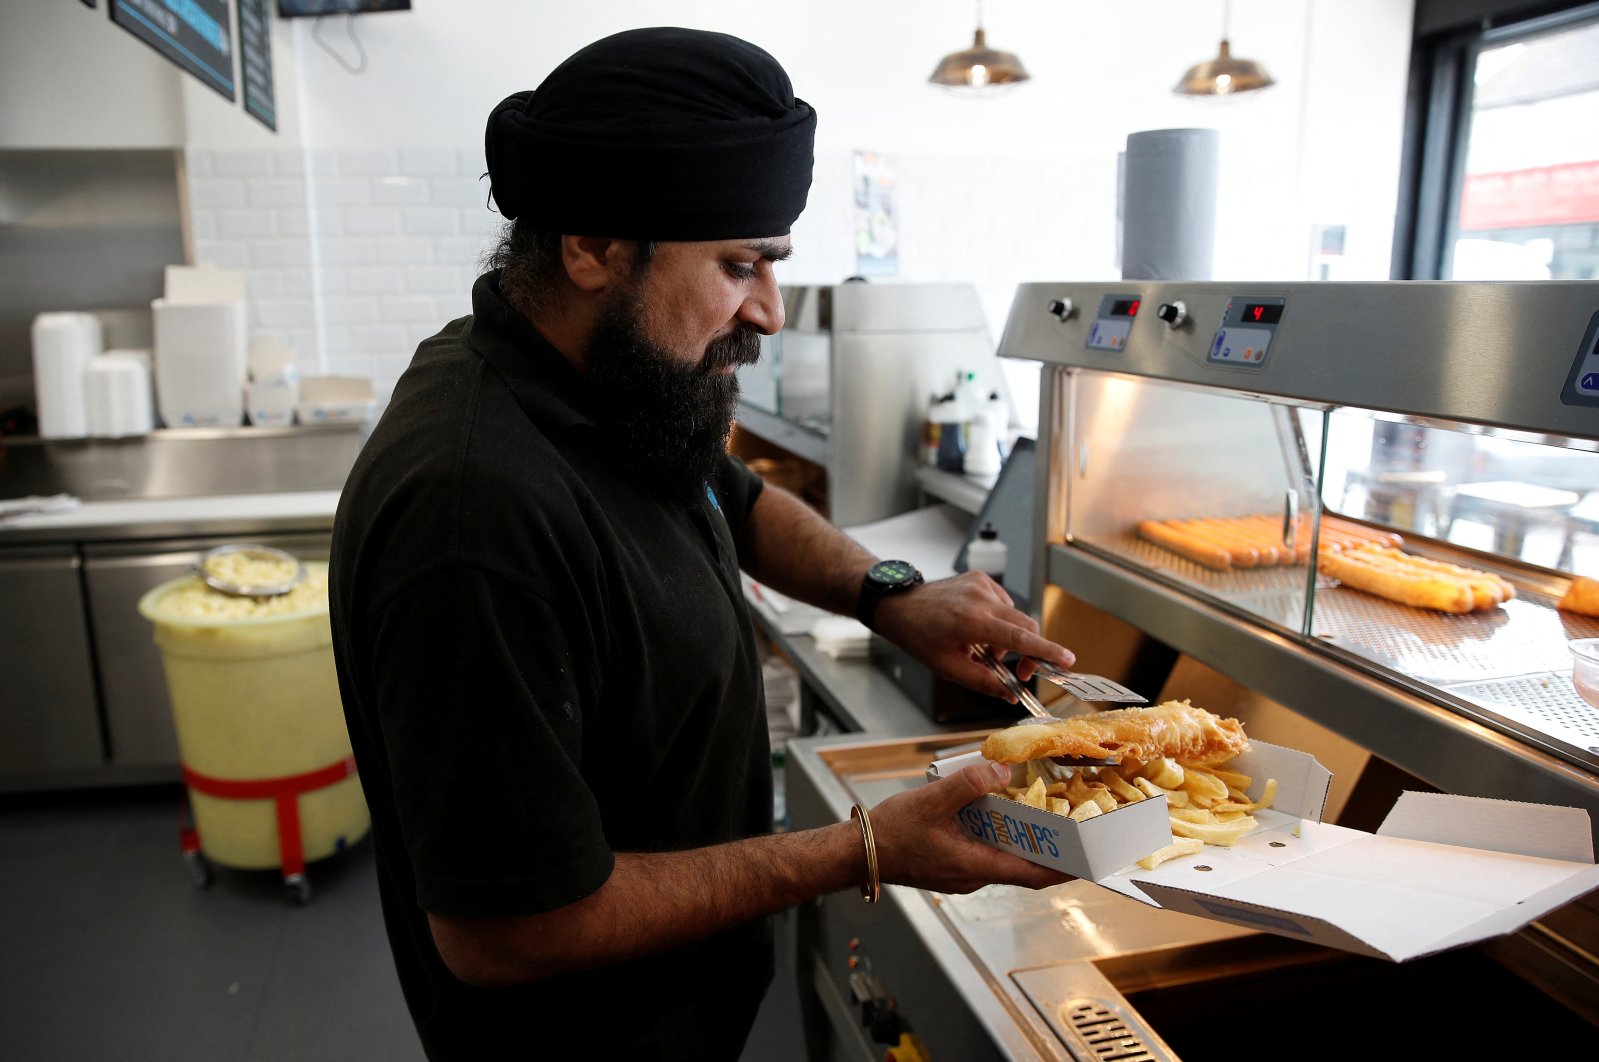 The owner of Hooked Fish and Chips shop, Bally Singh, prepares a portion of fish and chips at his takeaway in West Drayton, Britain, May 25, 2022. (Reuters Photo)